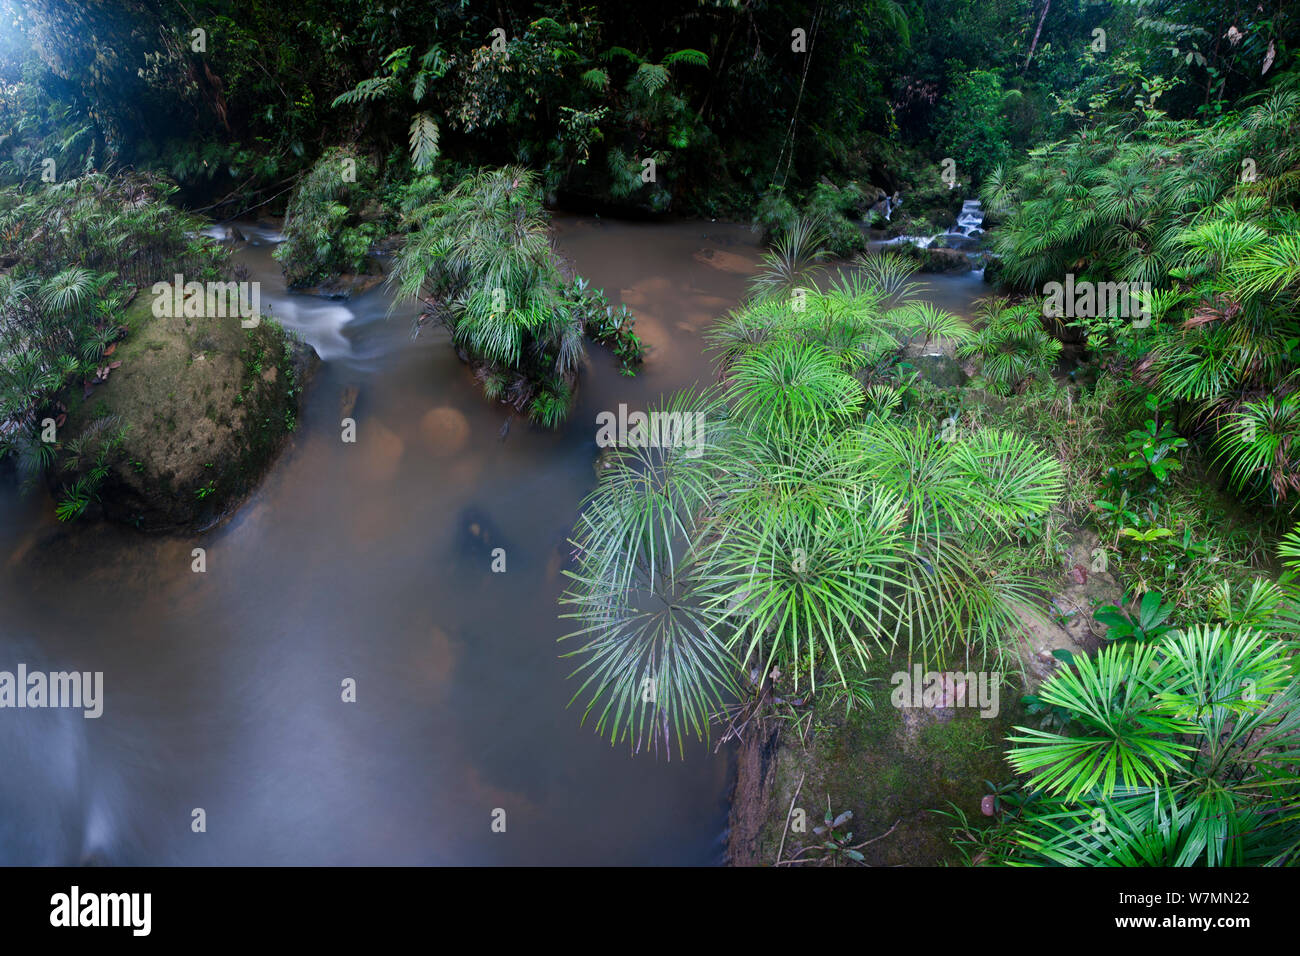 Clumps of a riverine fern (Dipteris lobbiana) growing in and along a tributary of the Maliau River, in the heart of Maliau Basin, Sabah's 'Lost World' near Ginseng Camp, Maliau Basin, Borneo (digitally stitched image) Stock Photo